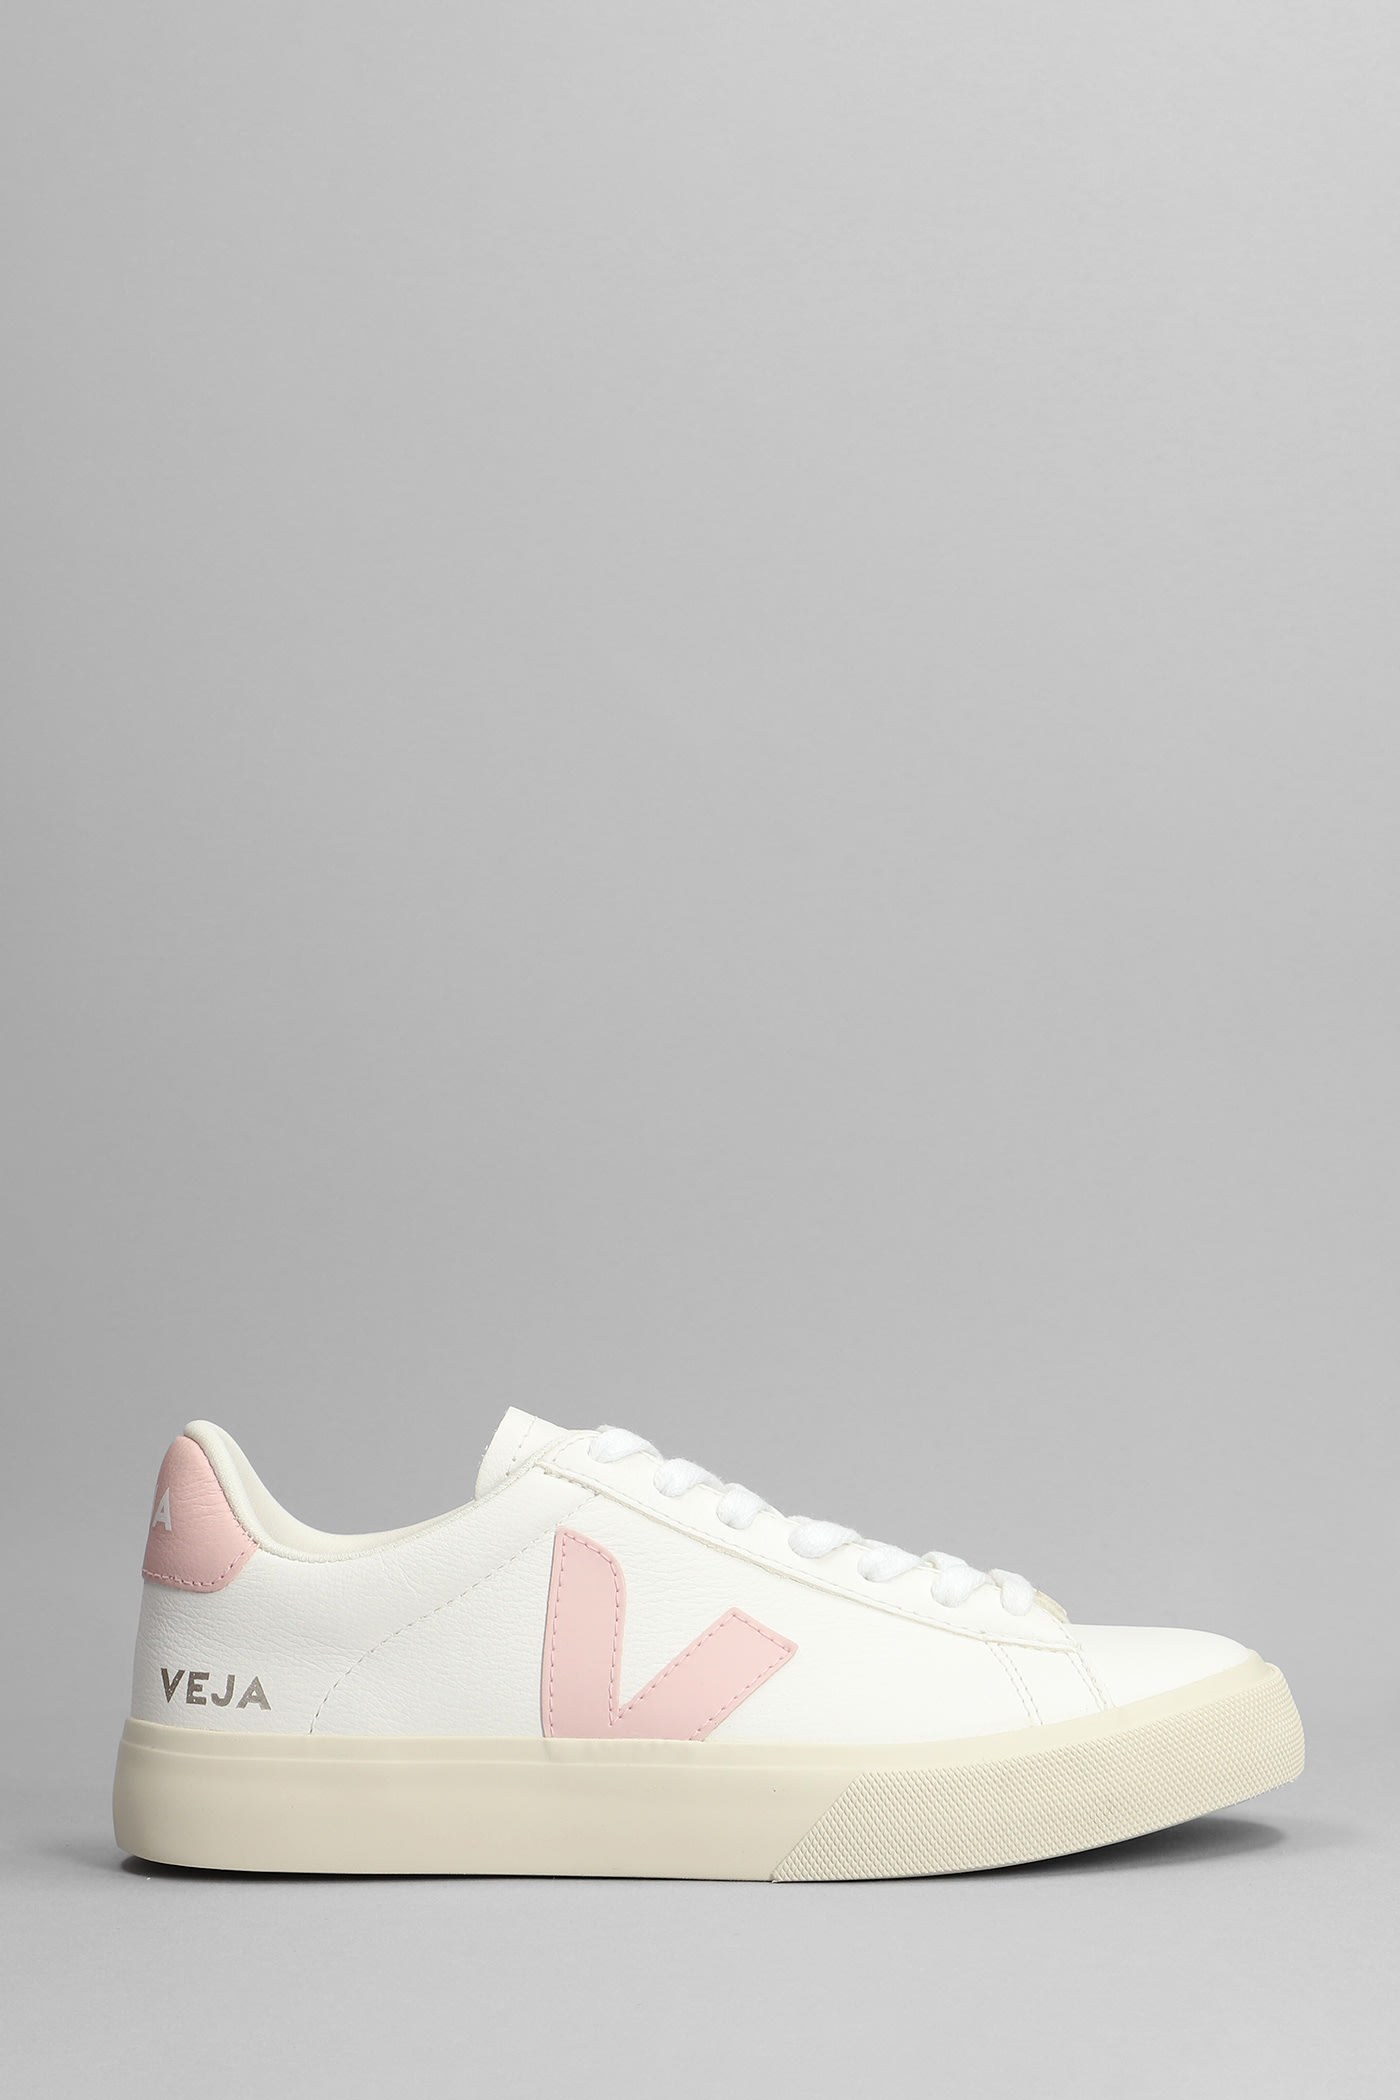 Veja Campo Chfree Sneakers In White Leather